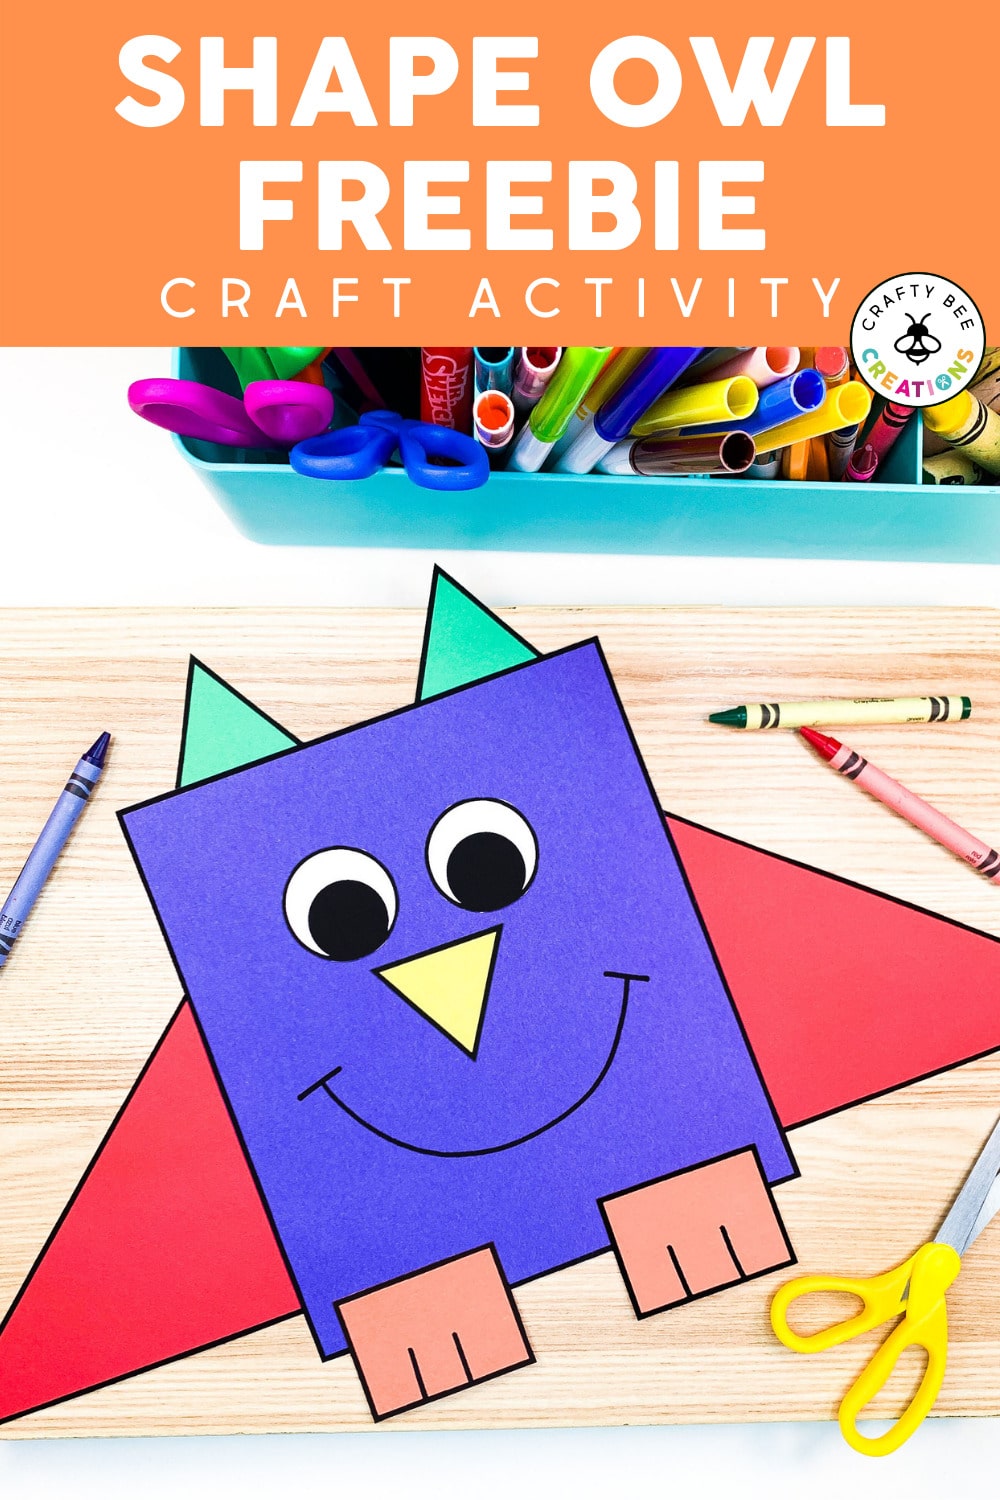 2D Shape Animal Crafts and An Owl FREEBIE! - Crafty Bee Creations